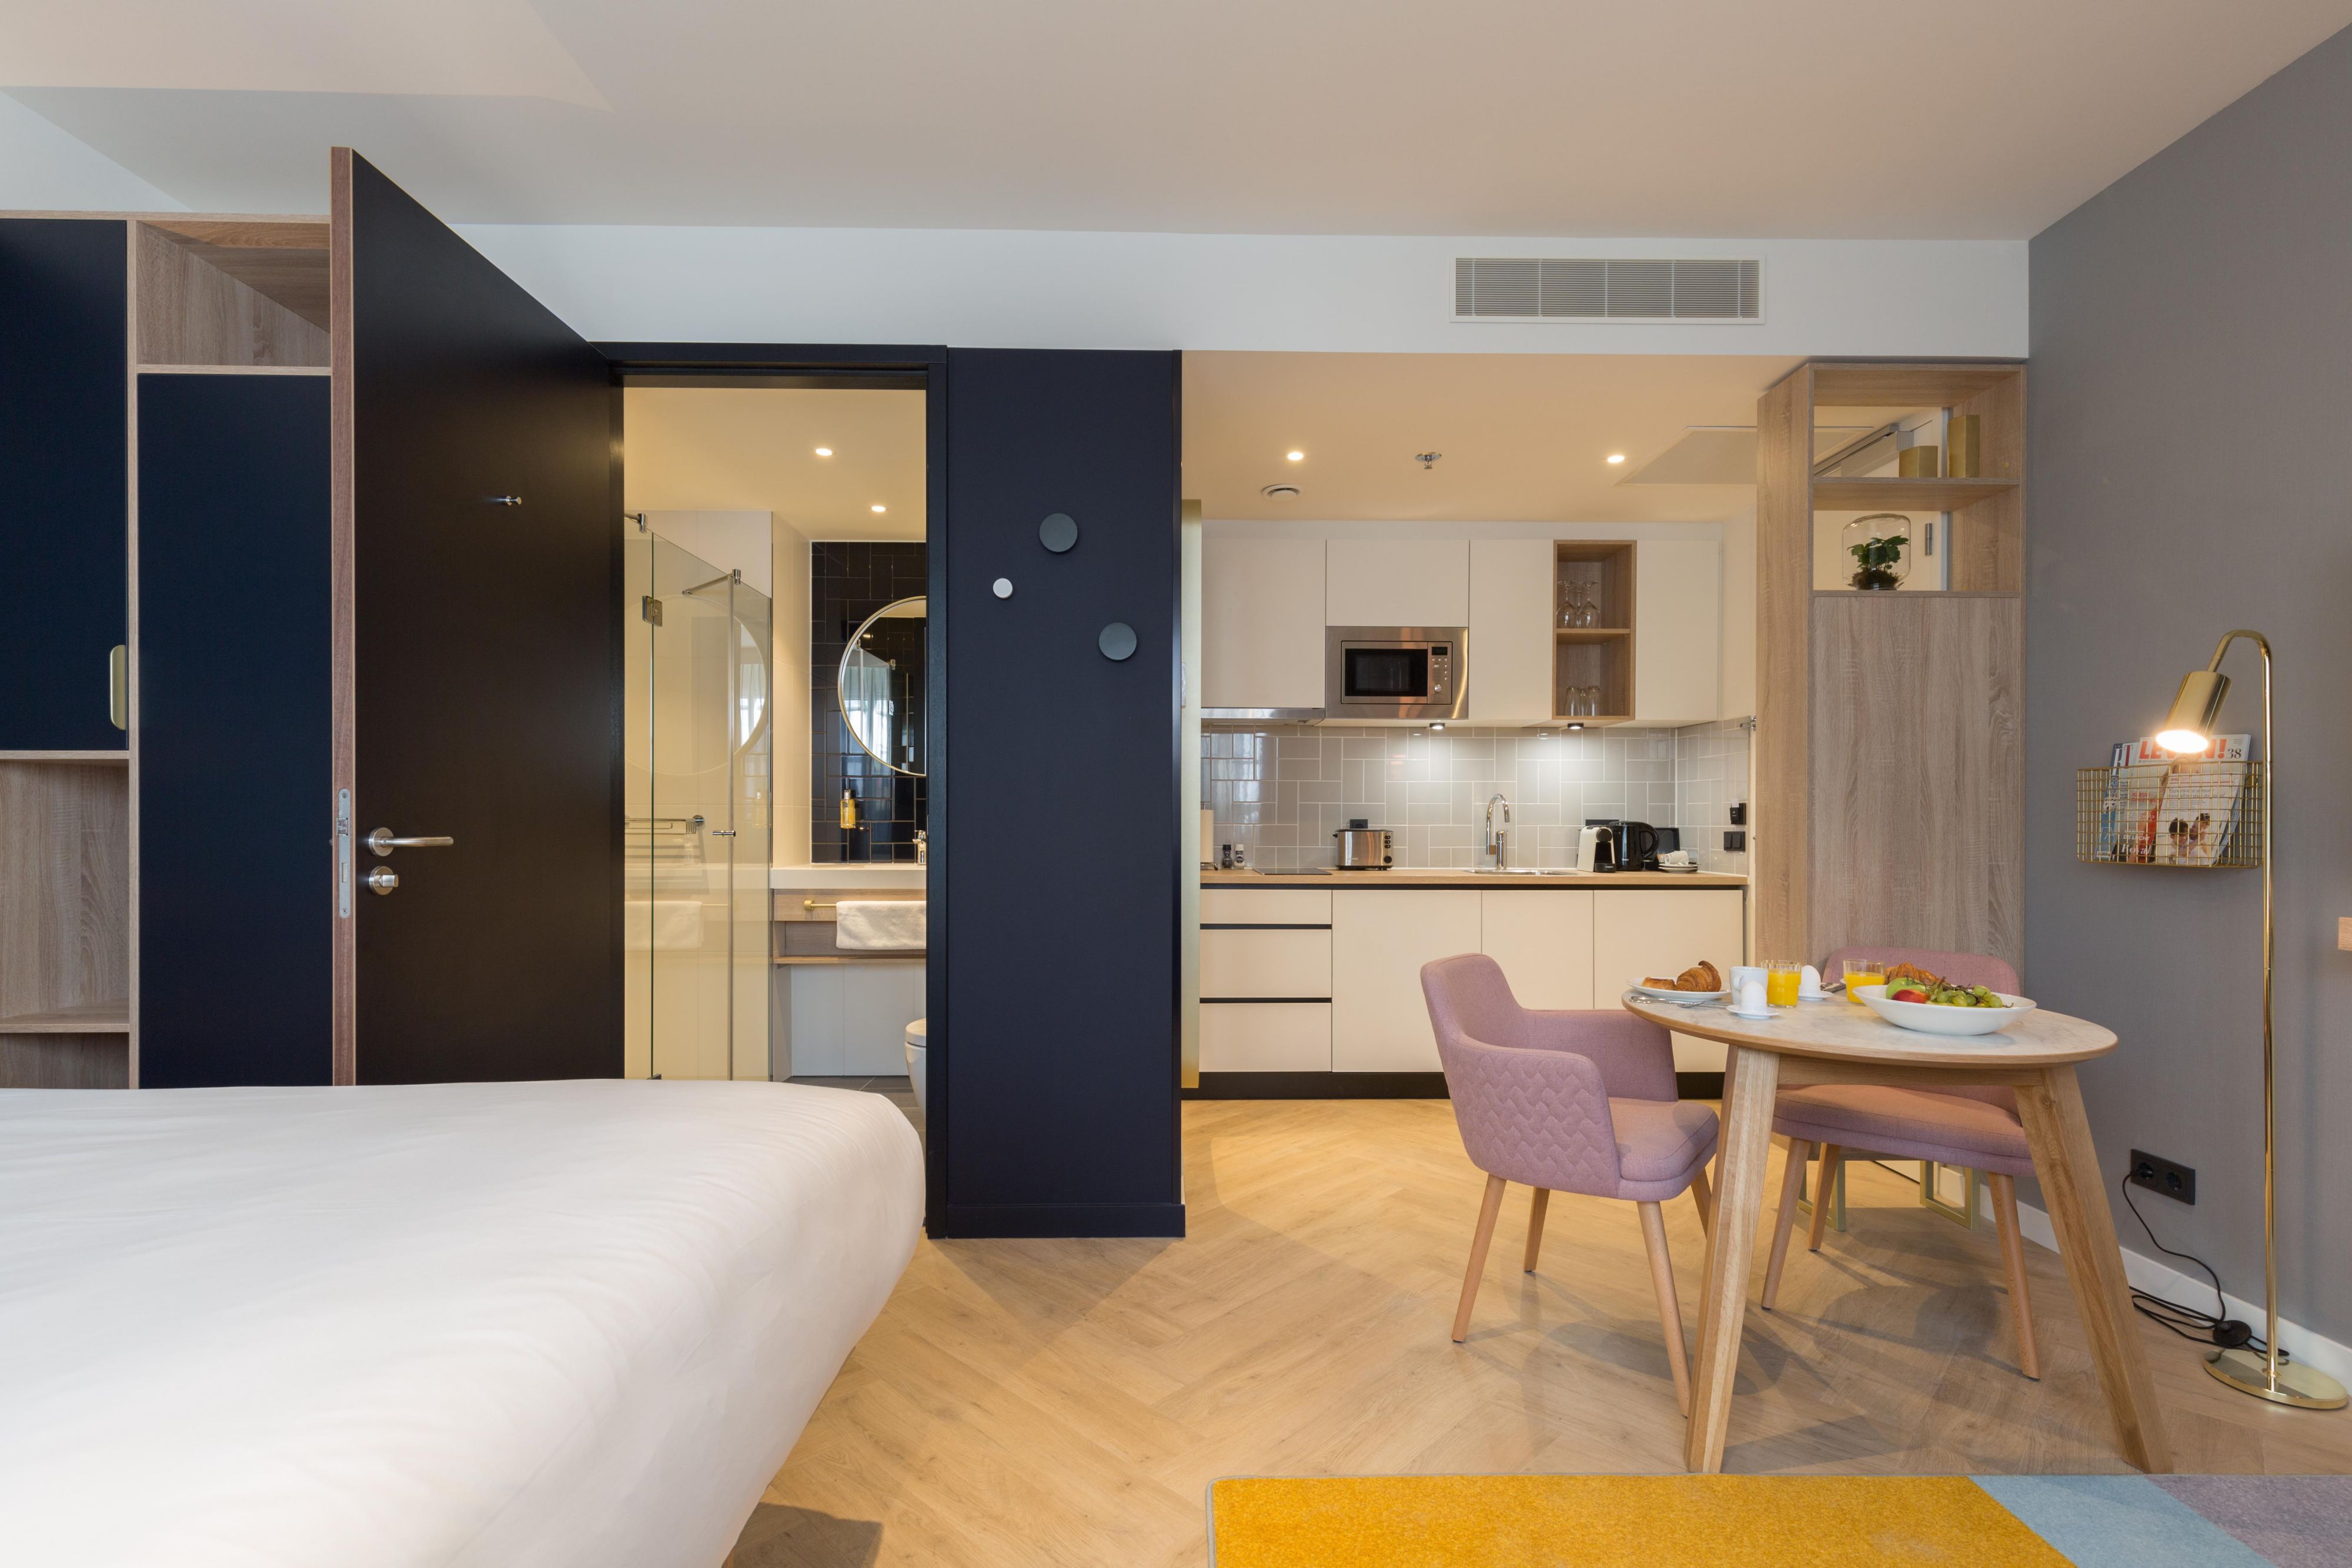 Our suites are ideal for those who need longer stays and the longer you stay the less you pay! Contact our team to discuss any corporate project requirements or relocations and enjoy the comfort of a home away from home at Staybridge Suites.